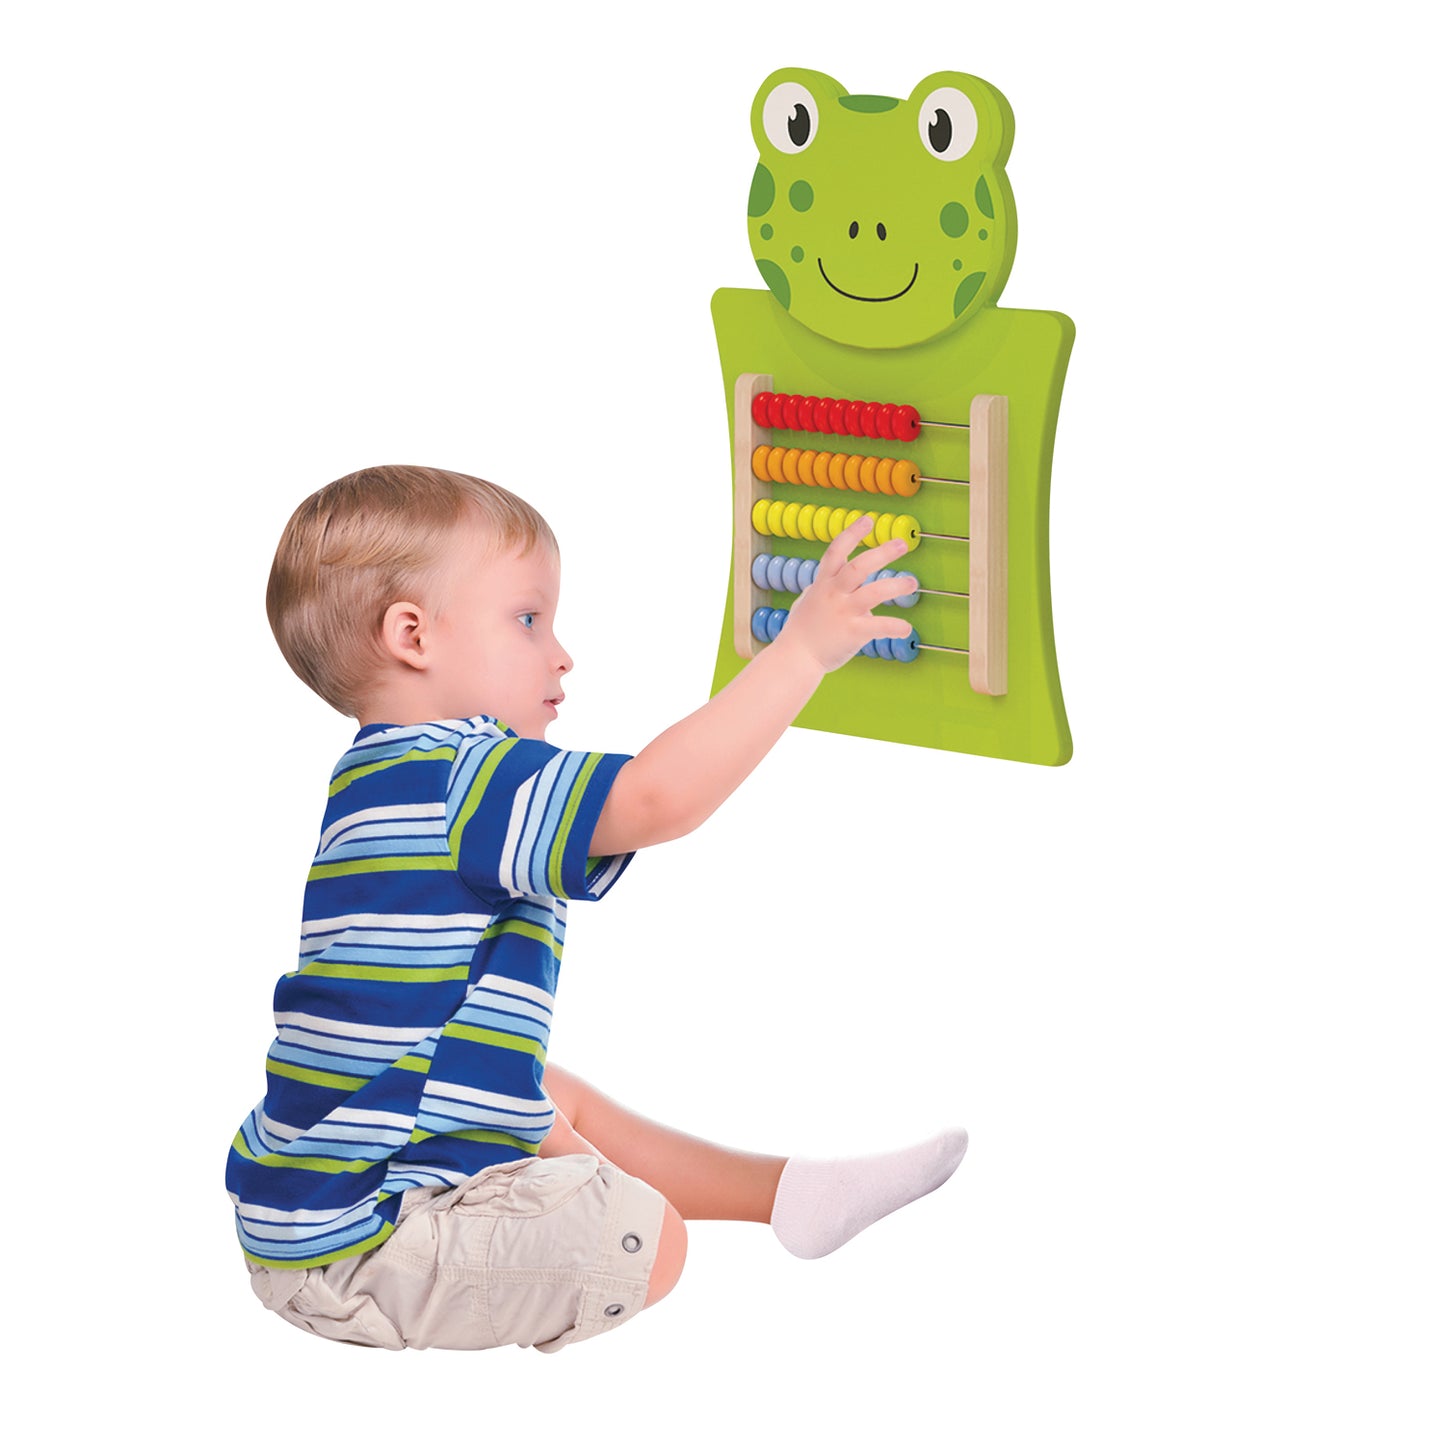 Frog Activity Wall Panel - Toddler Activity Center